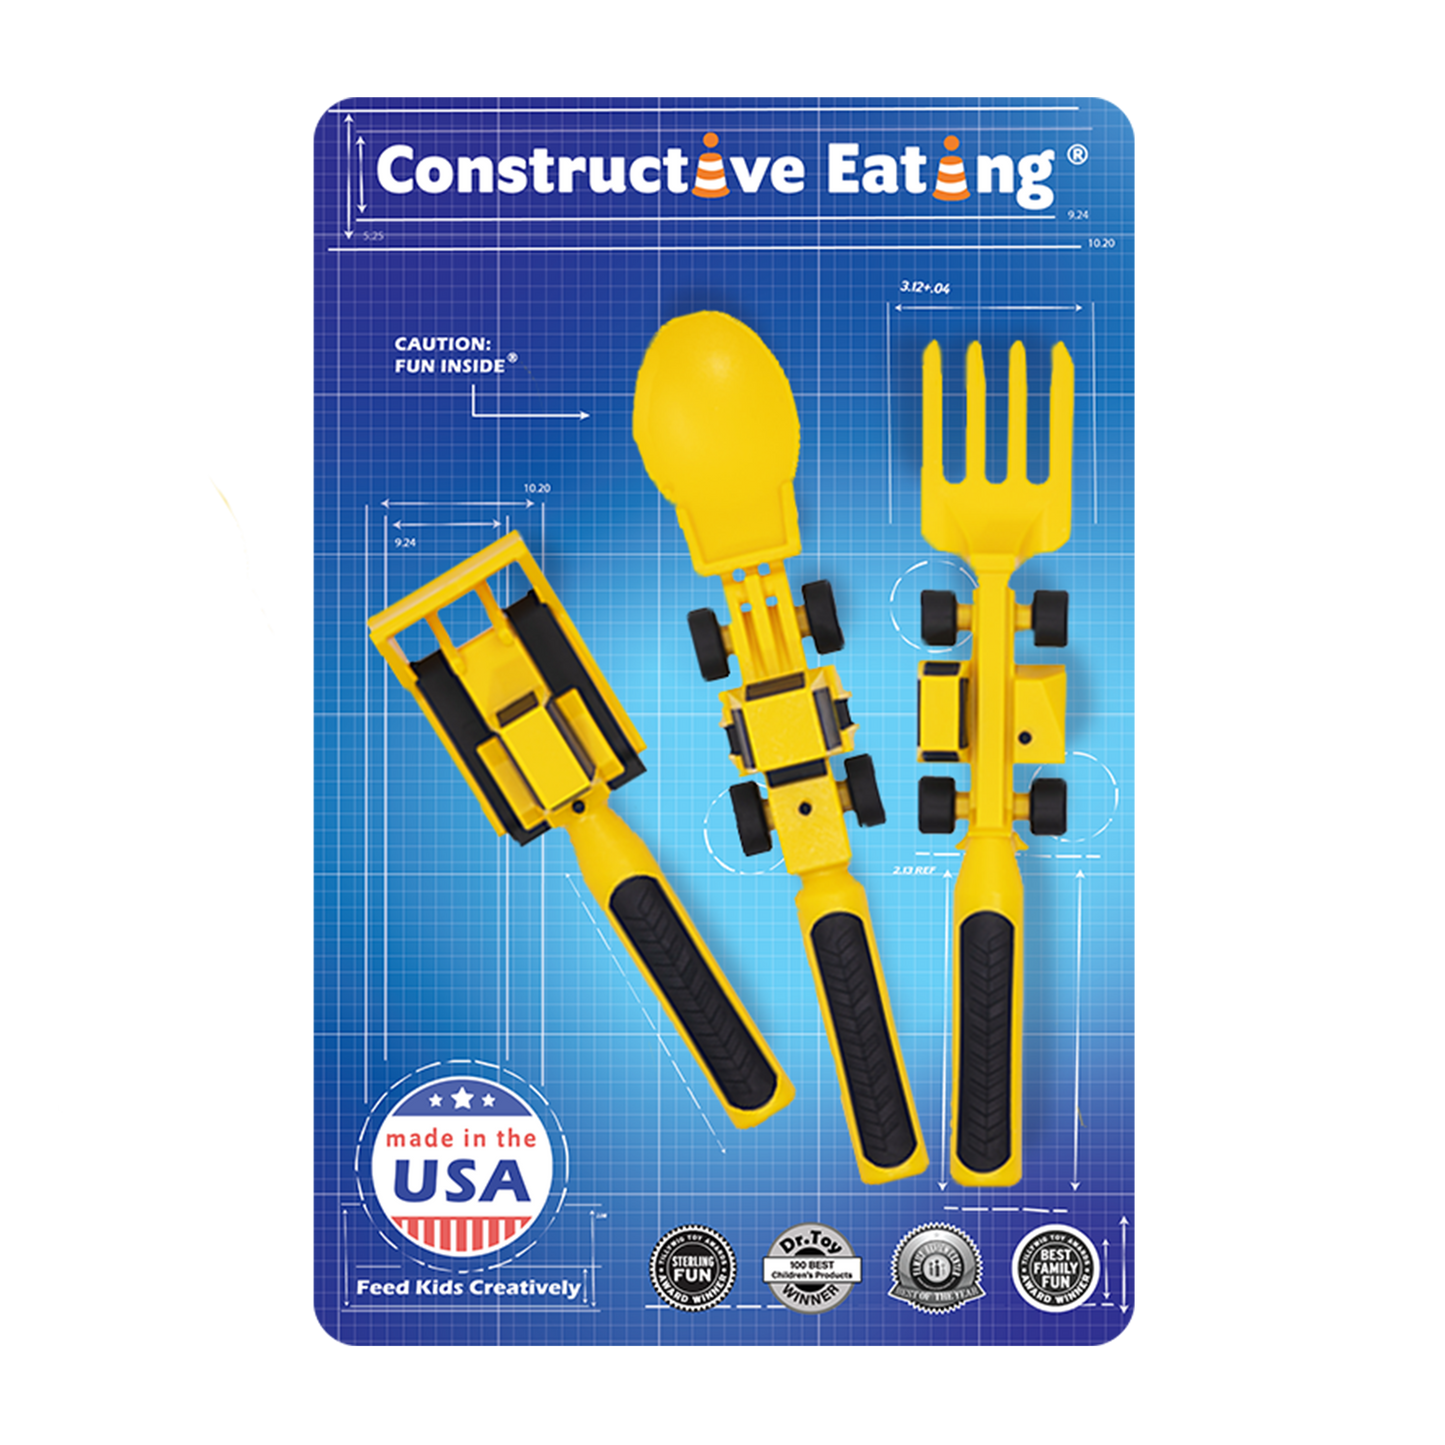 Made in USA construction utensils - Fork, spoon, and pusher packaging